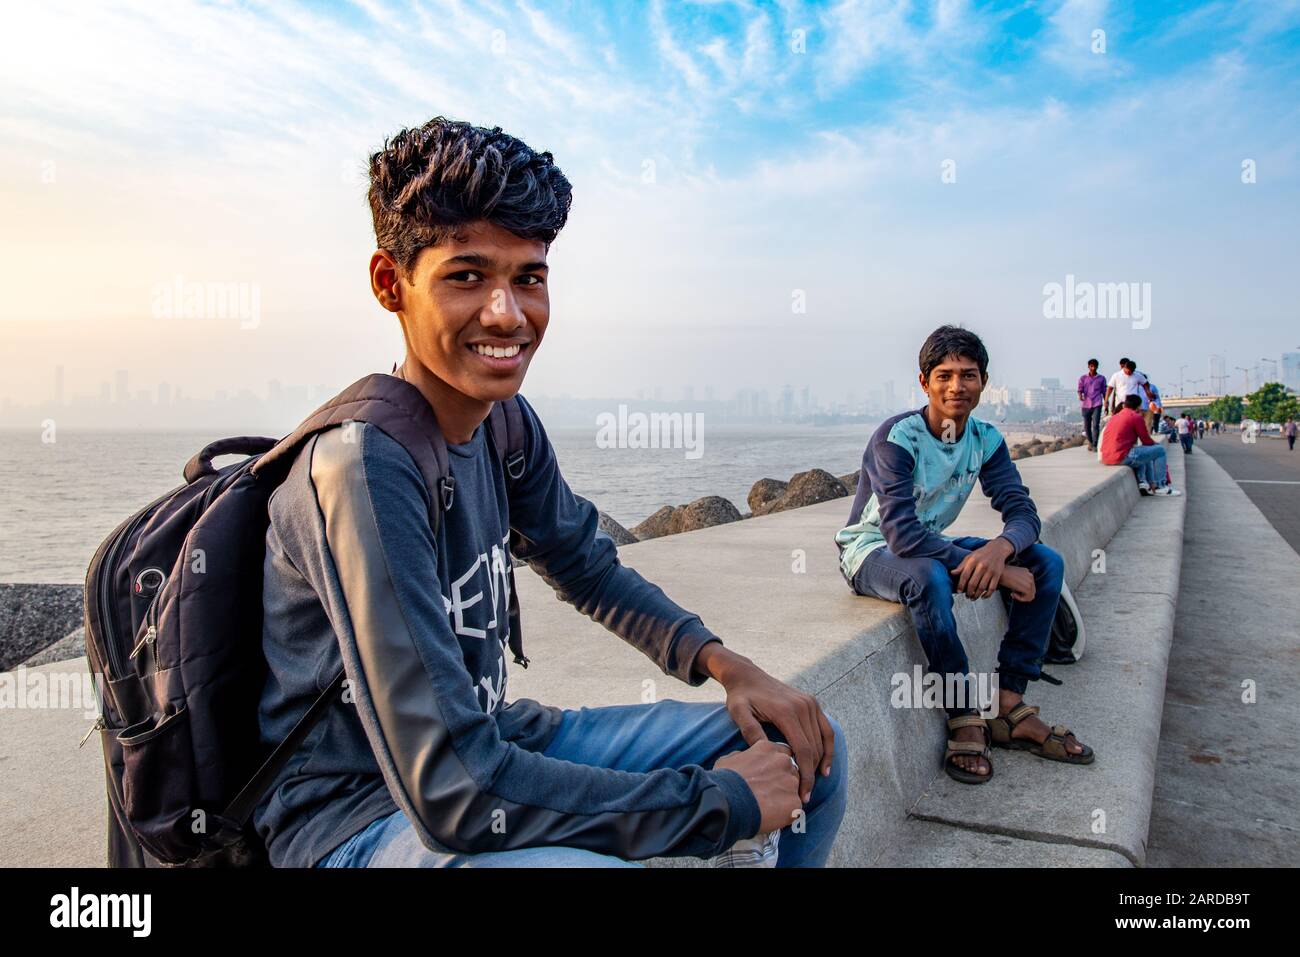 Mumbai, India - December 15, 2017: Young Indian men taking a pose at the camera on Marine Drive, taken at the end of the afternoon Stock Photo